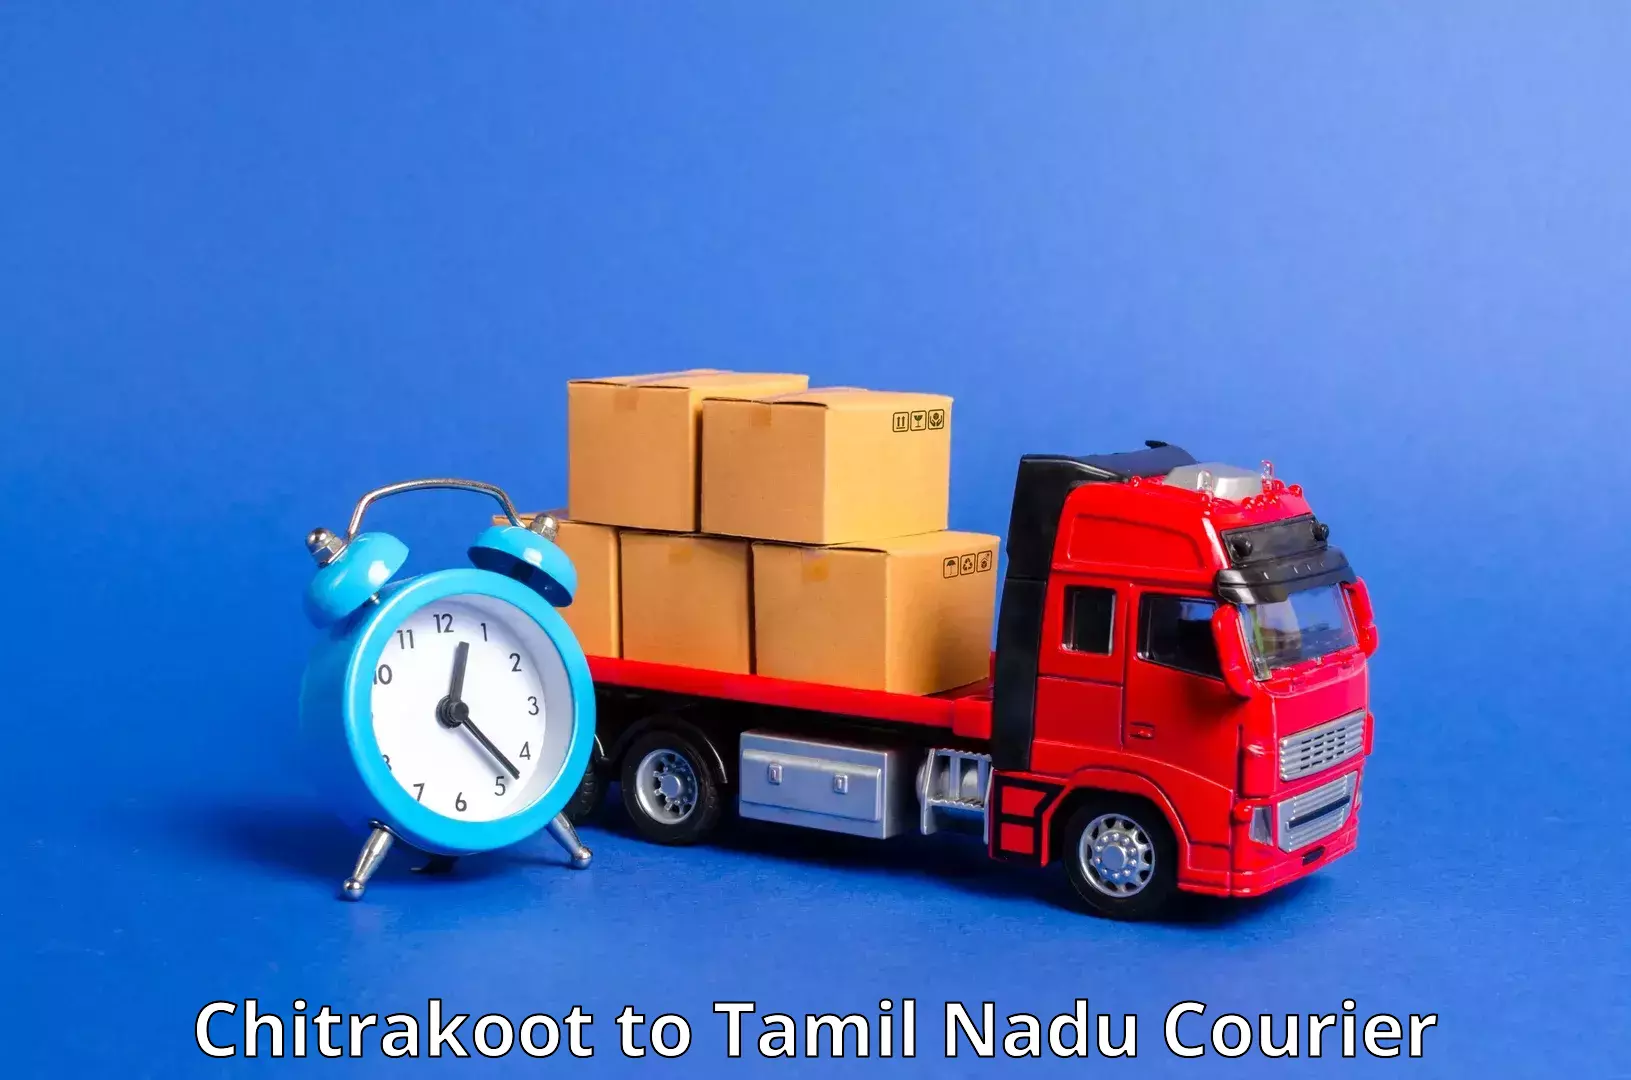 Package delivery network Chitrakoot to Polur